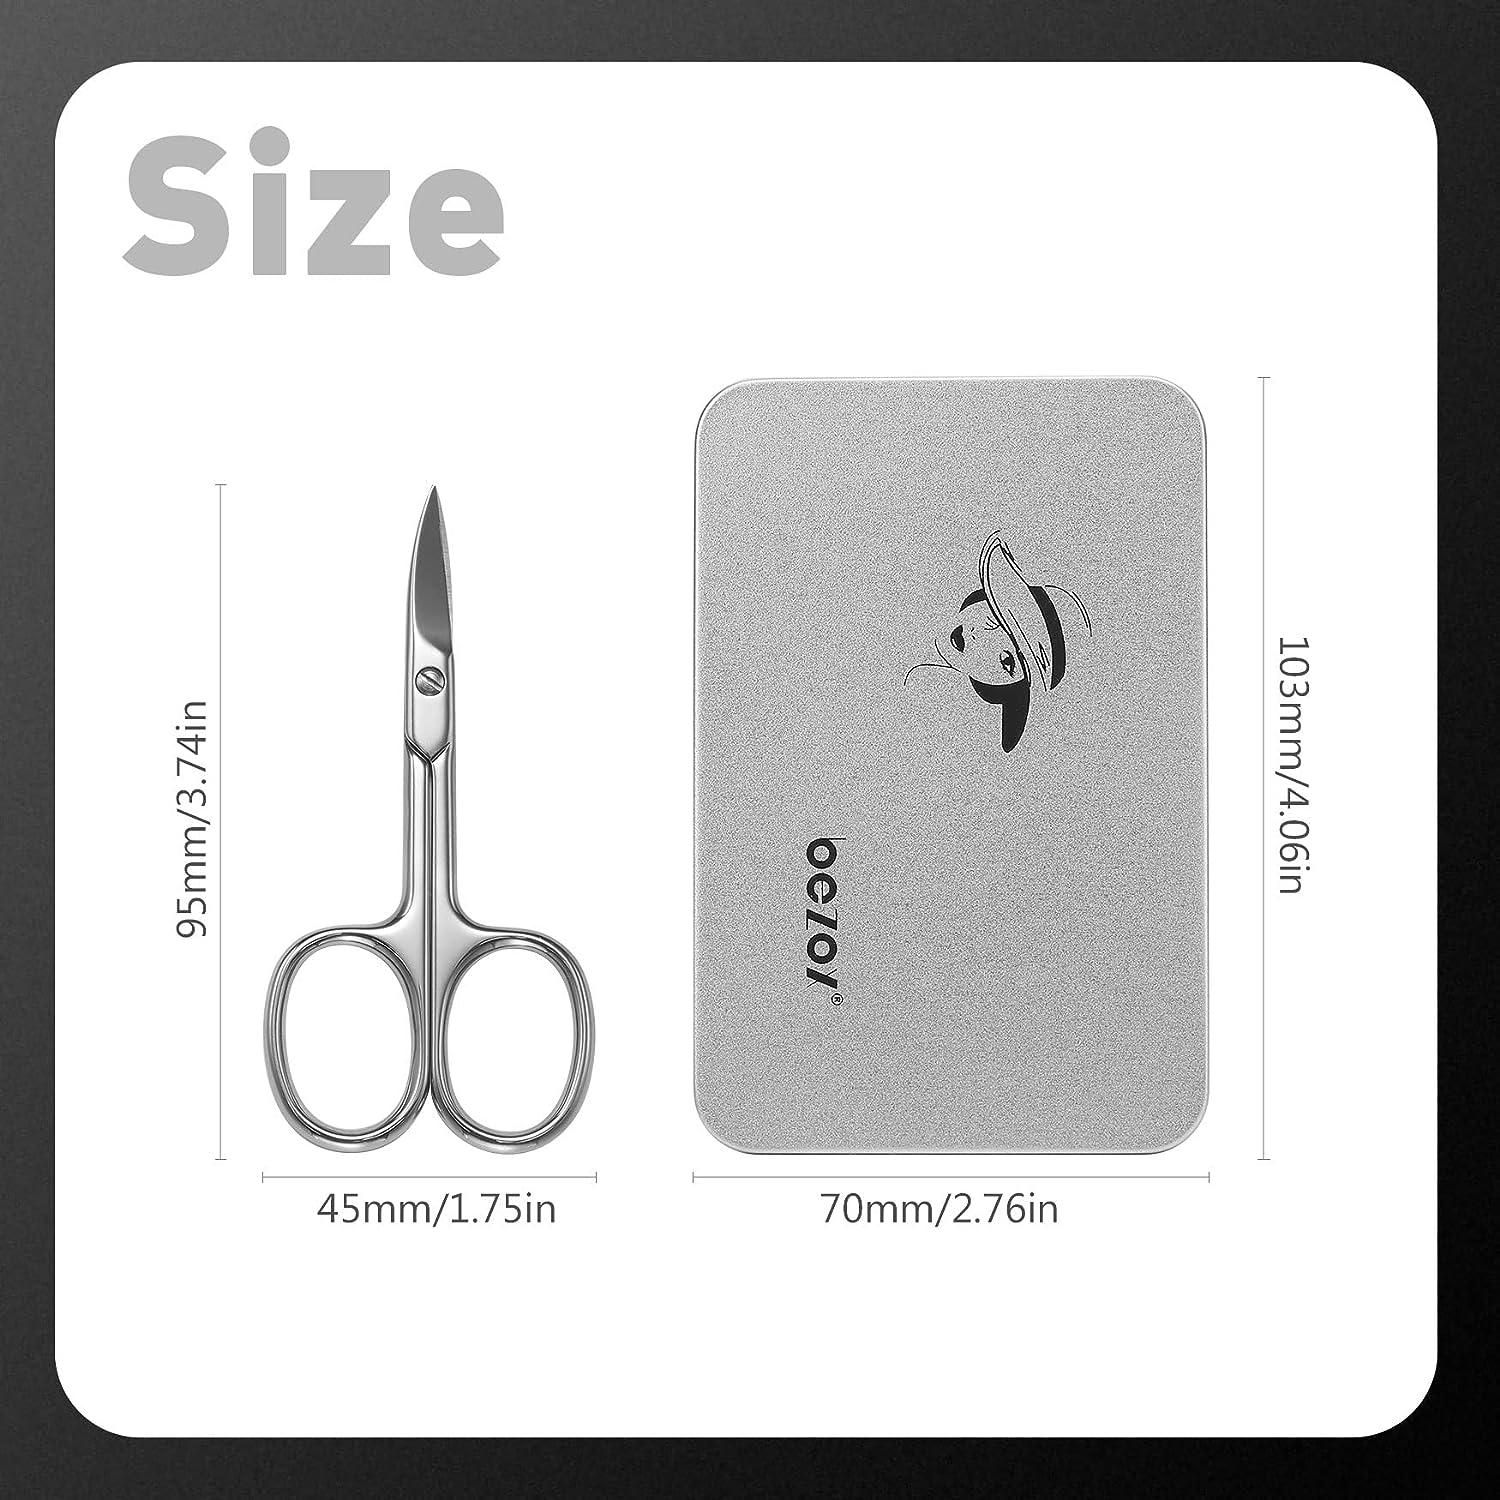 BEZOX Premium Nail Scissors 2PCS, Professional Curved and Stright Manicure  Scissors - Multi-purpose Stainless Steel Beauty Grooming Scissor for Nail